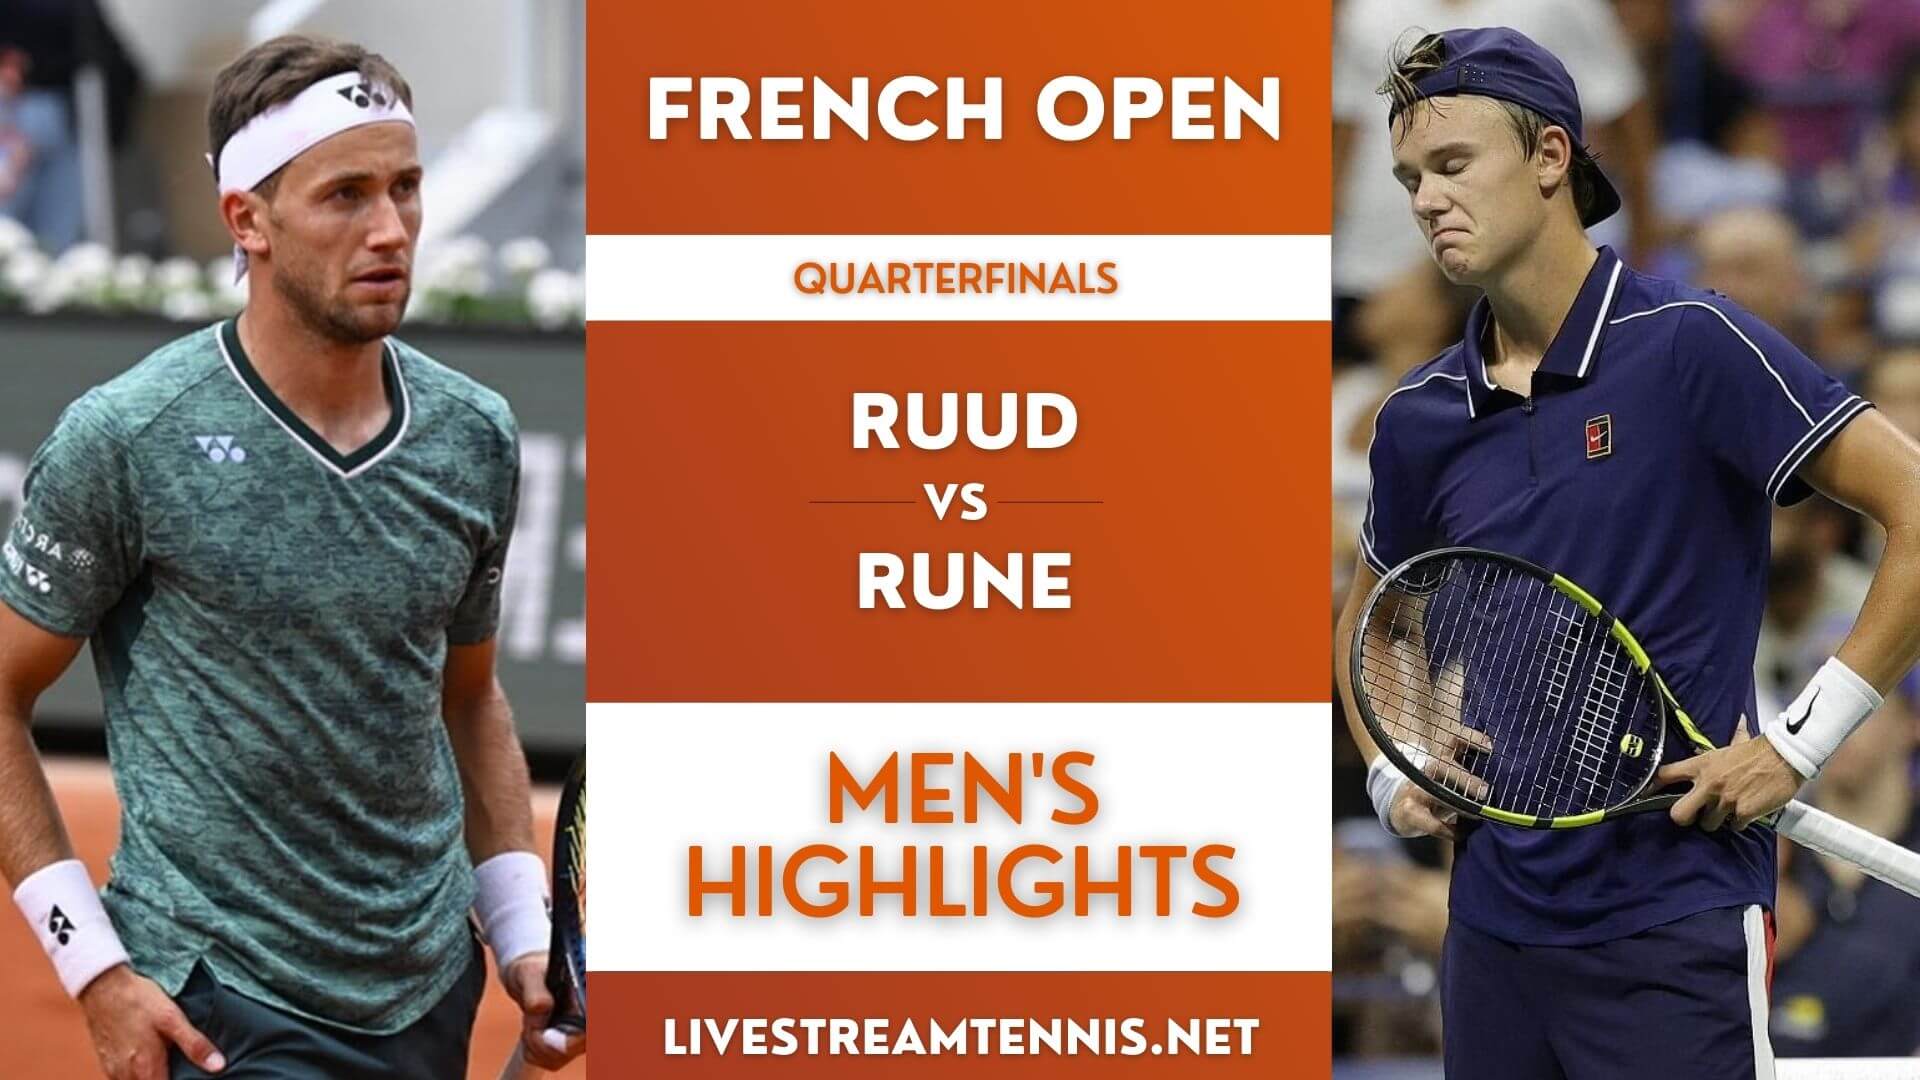 French Open Gents Quarterfinal 3 Highlights 2022